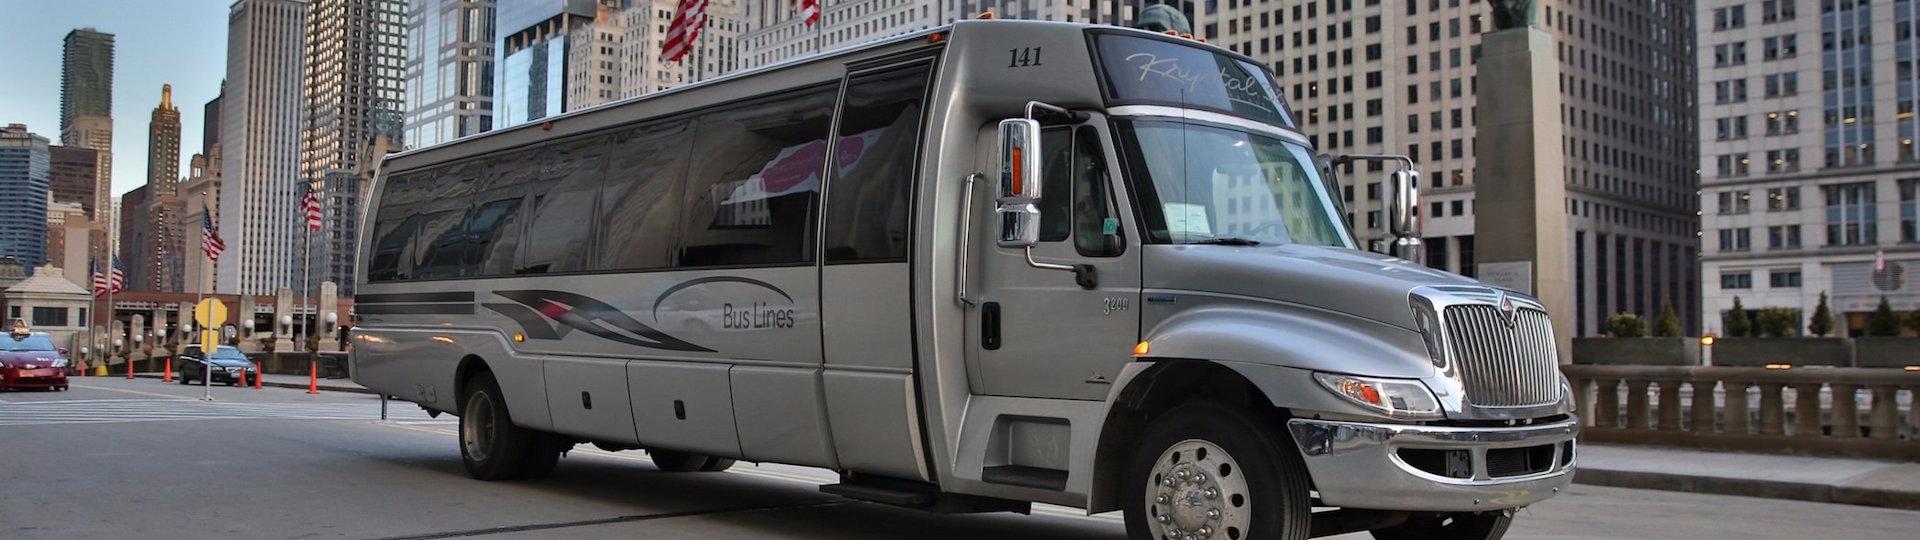 Party Bus Specials Chicago Illinois